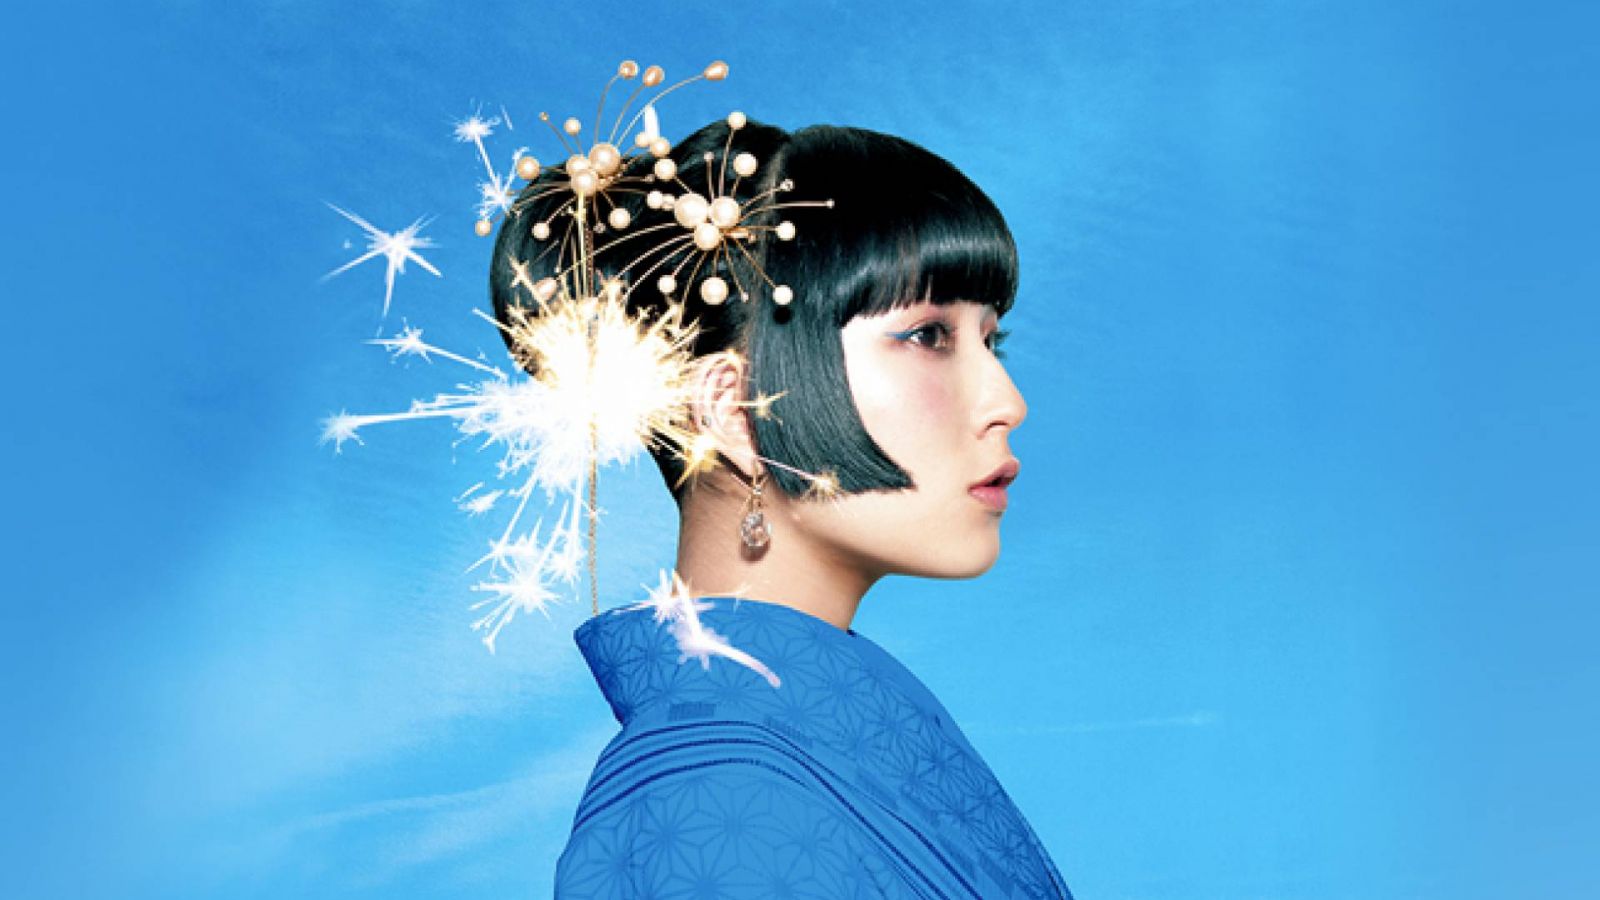 DAOKO - THANK YOU BLUE © TOY’ S FACTORY INC. ALL RIGHTS RESERVED.